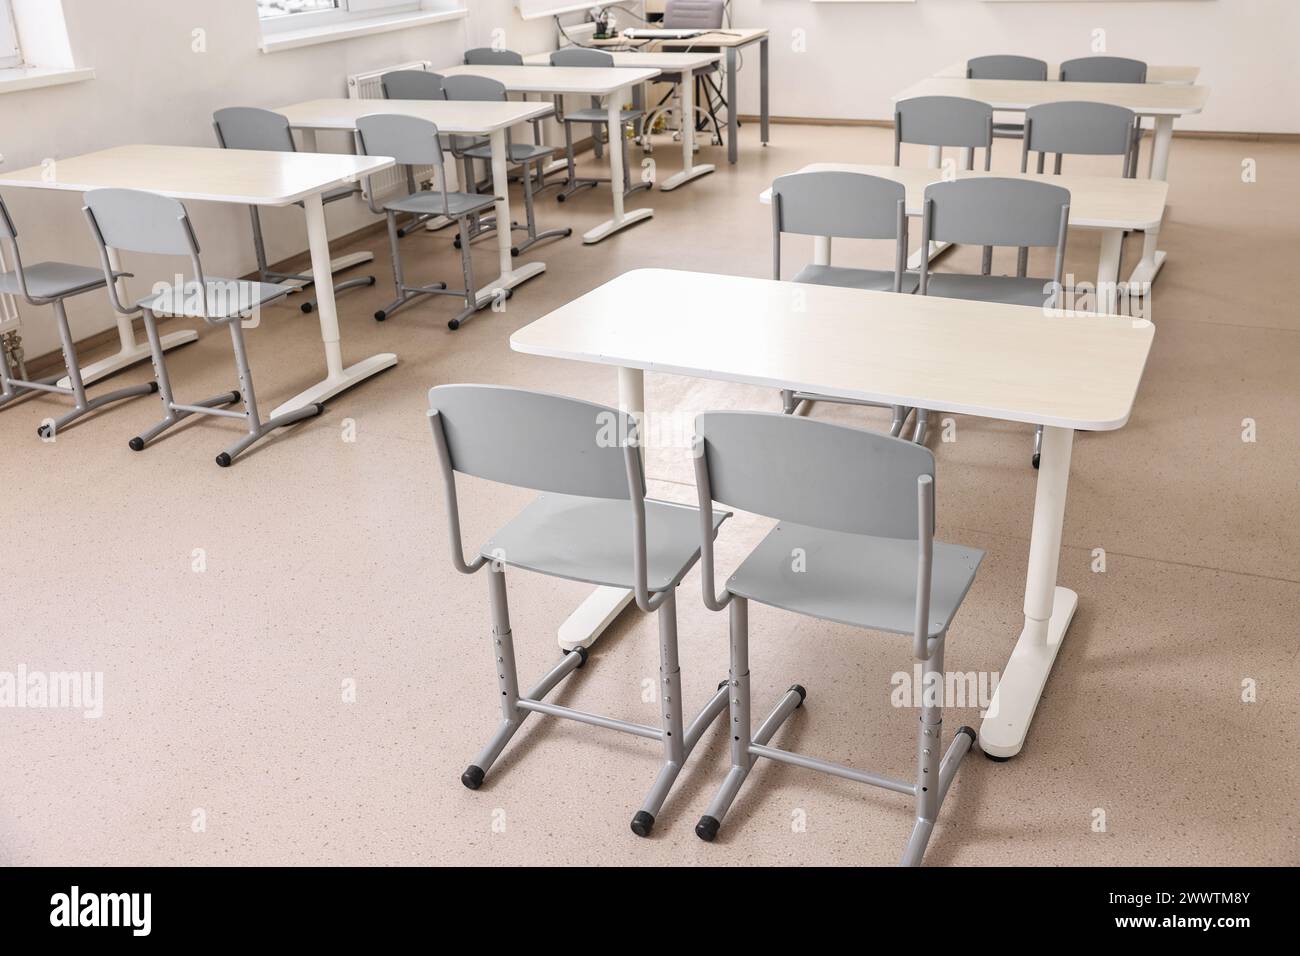 Empty school classroom with desks and chairs Stock Photo